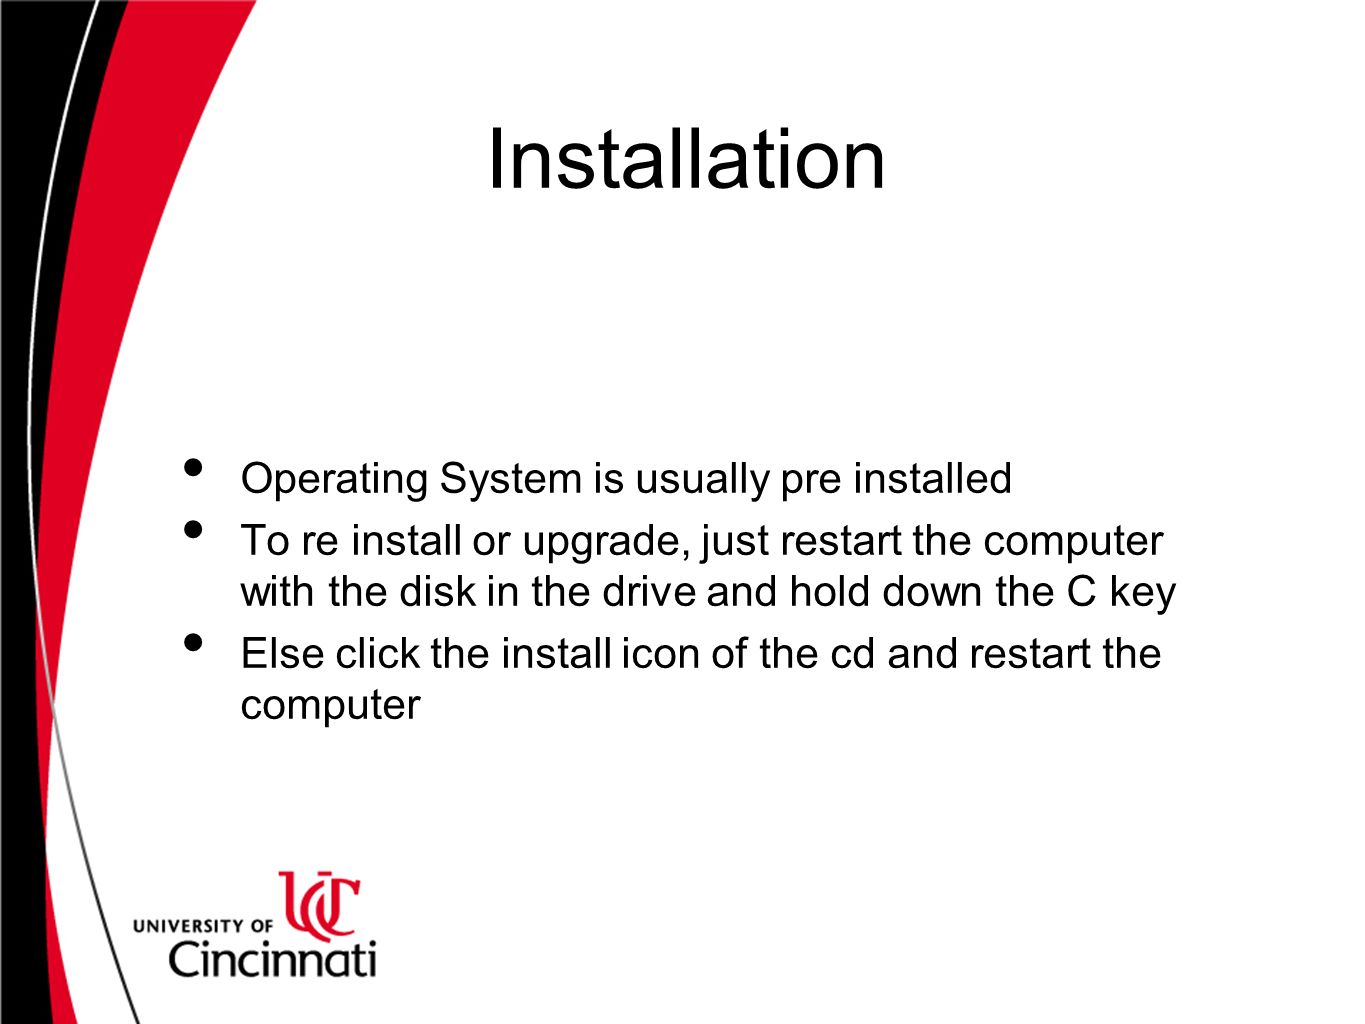 Installation Operating System is usually pre installed To re install or upgrade, just restart the computer with the disk in the drive and hold down the C key Else click the install icon of the cd and restart the computer